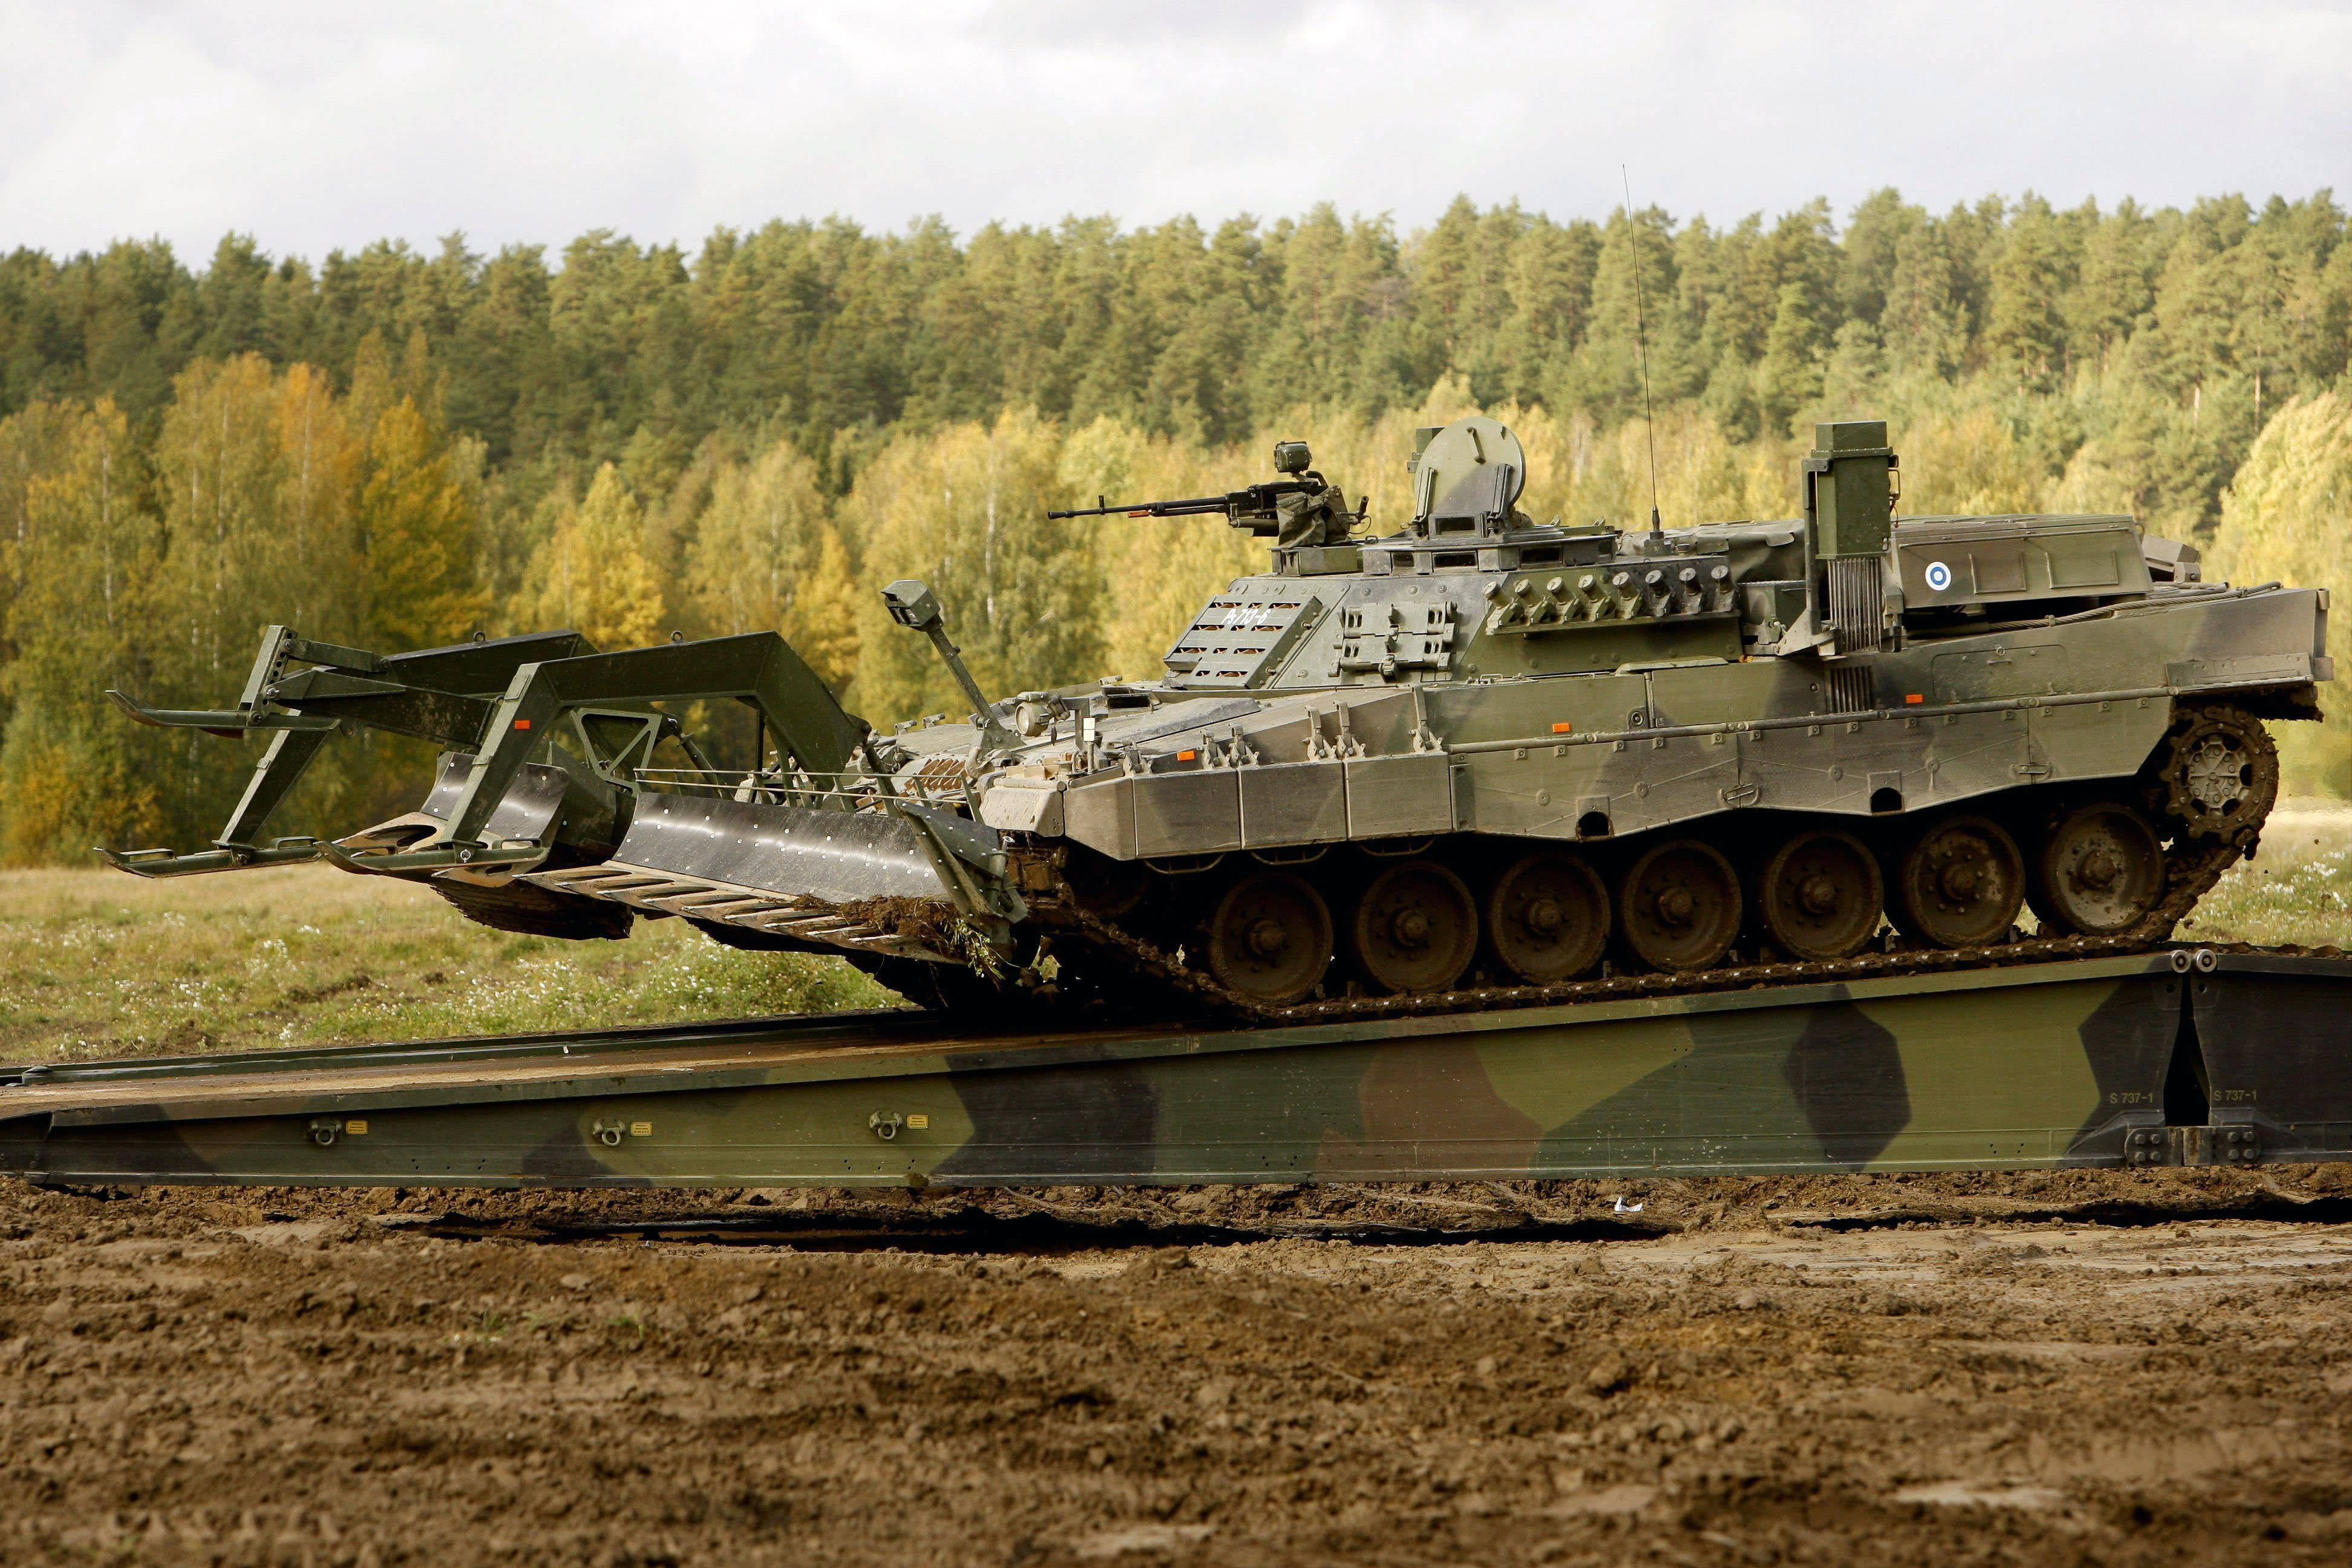 Finland includes three Leopard tanks in the latest arms package to Ukraine